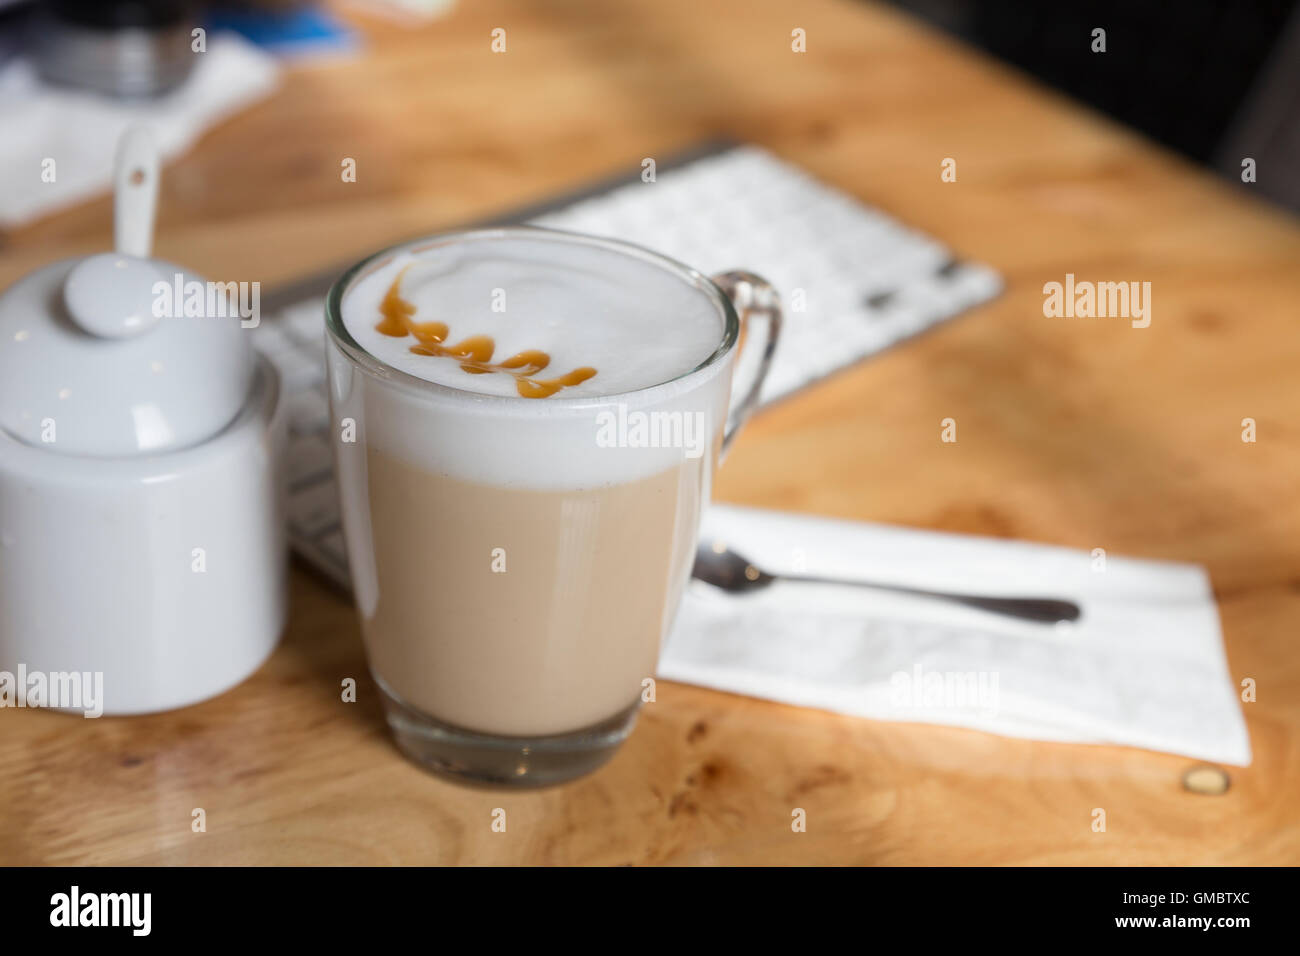 hot cappuccino coffee drink cup with sugar mug on wooden desk Stock Photo